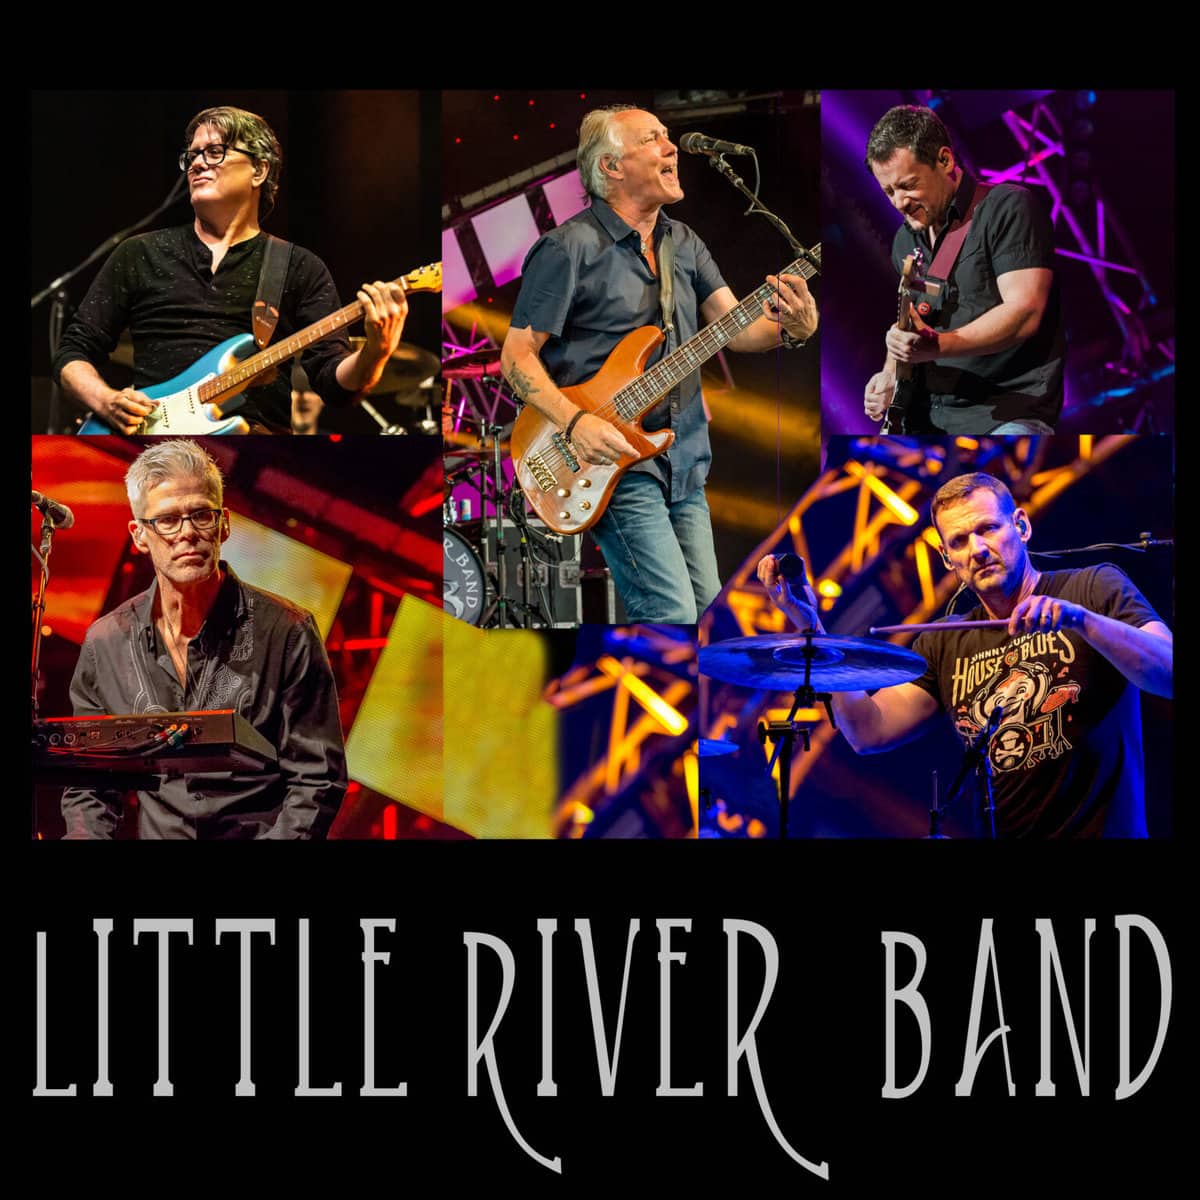 Photo montage of The LLittle River Band playing on stage